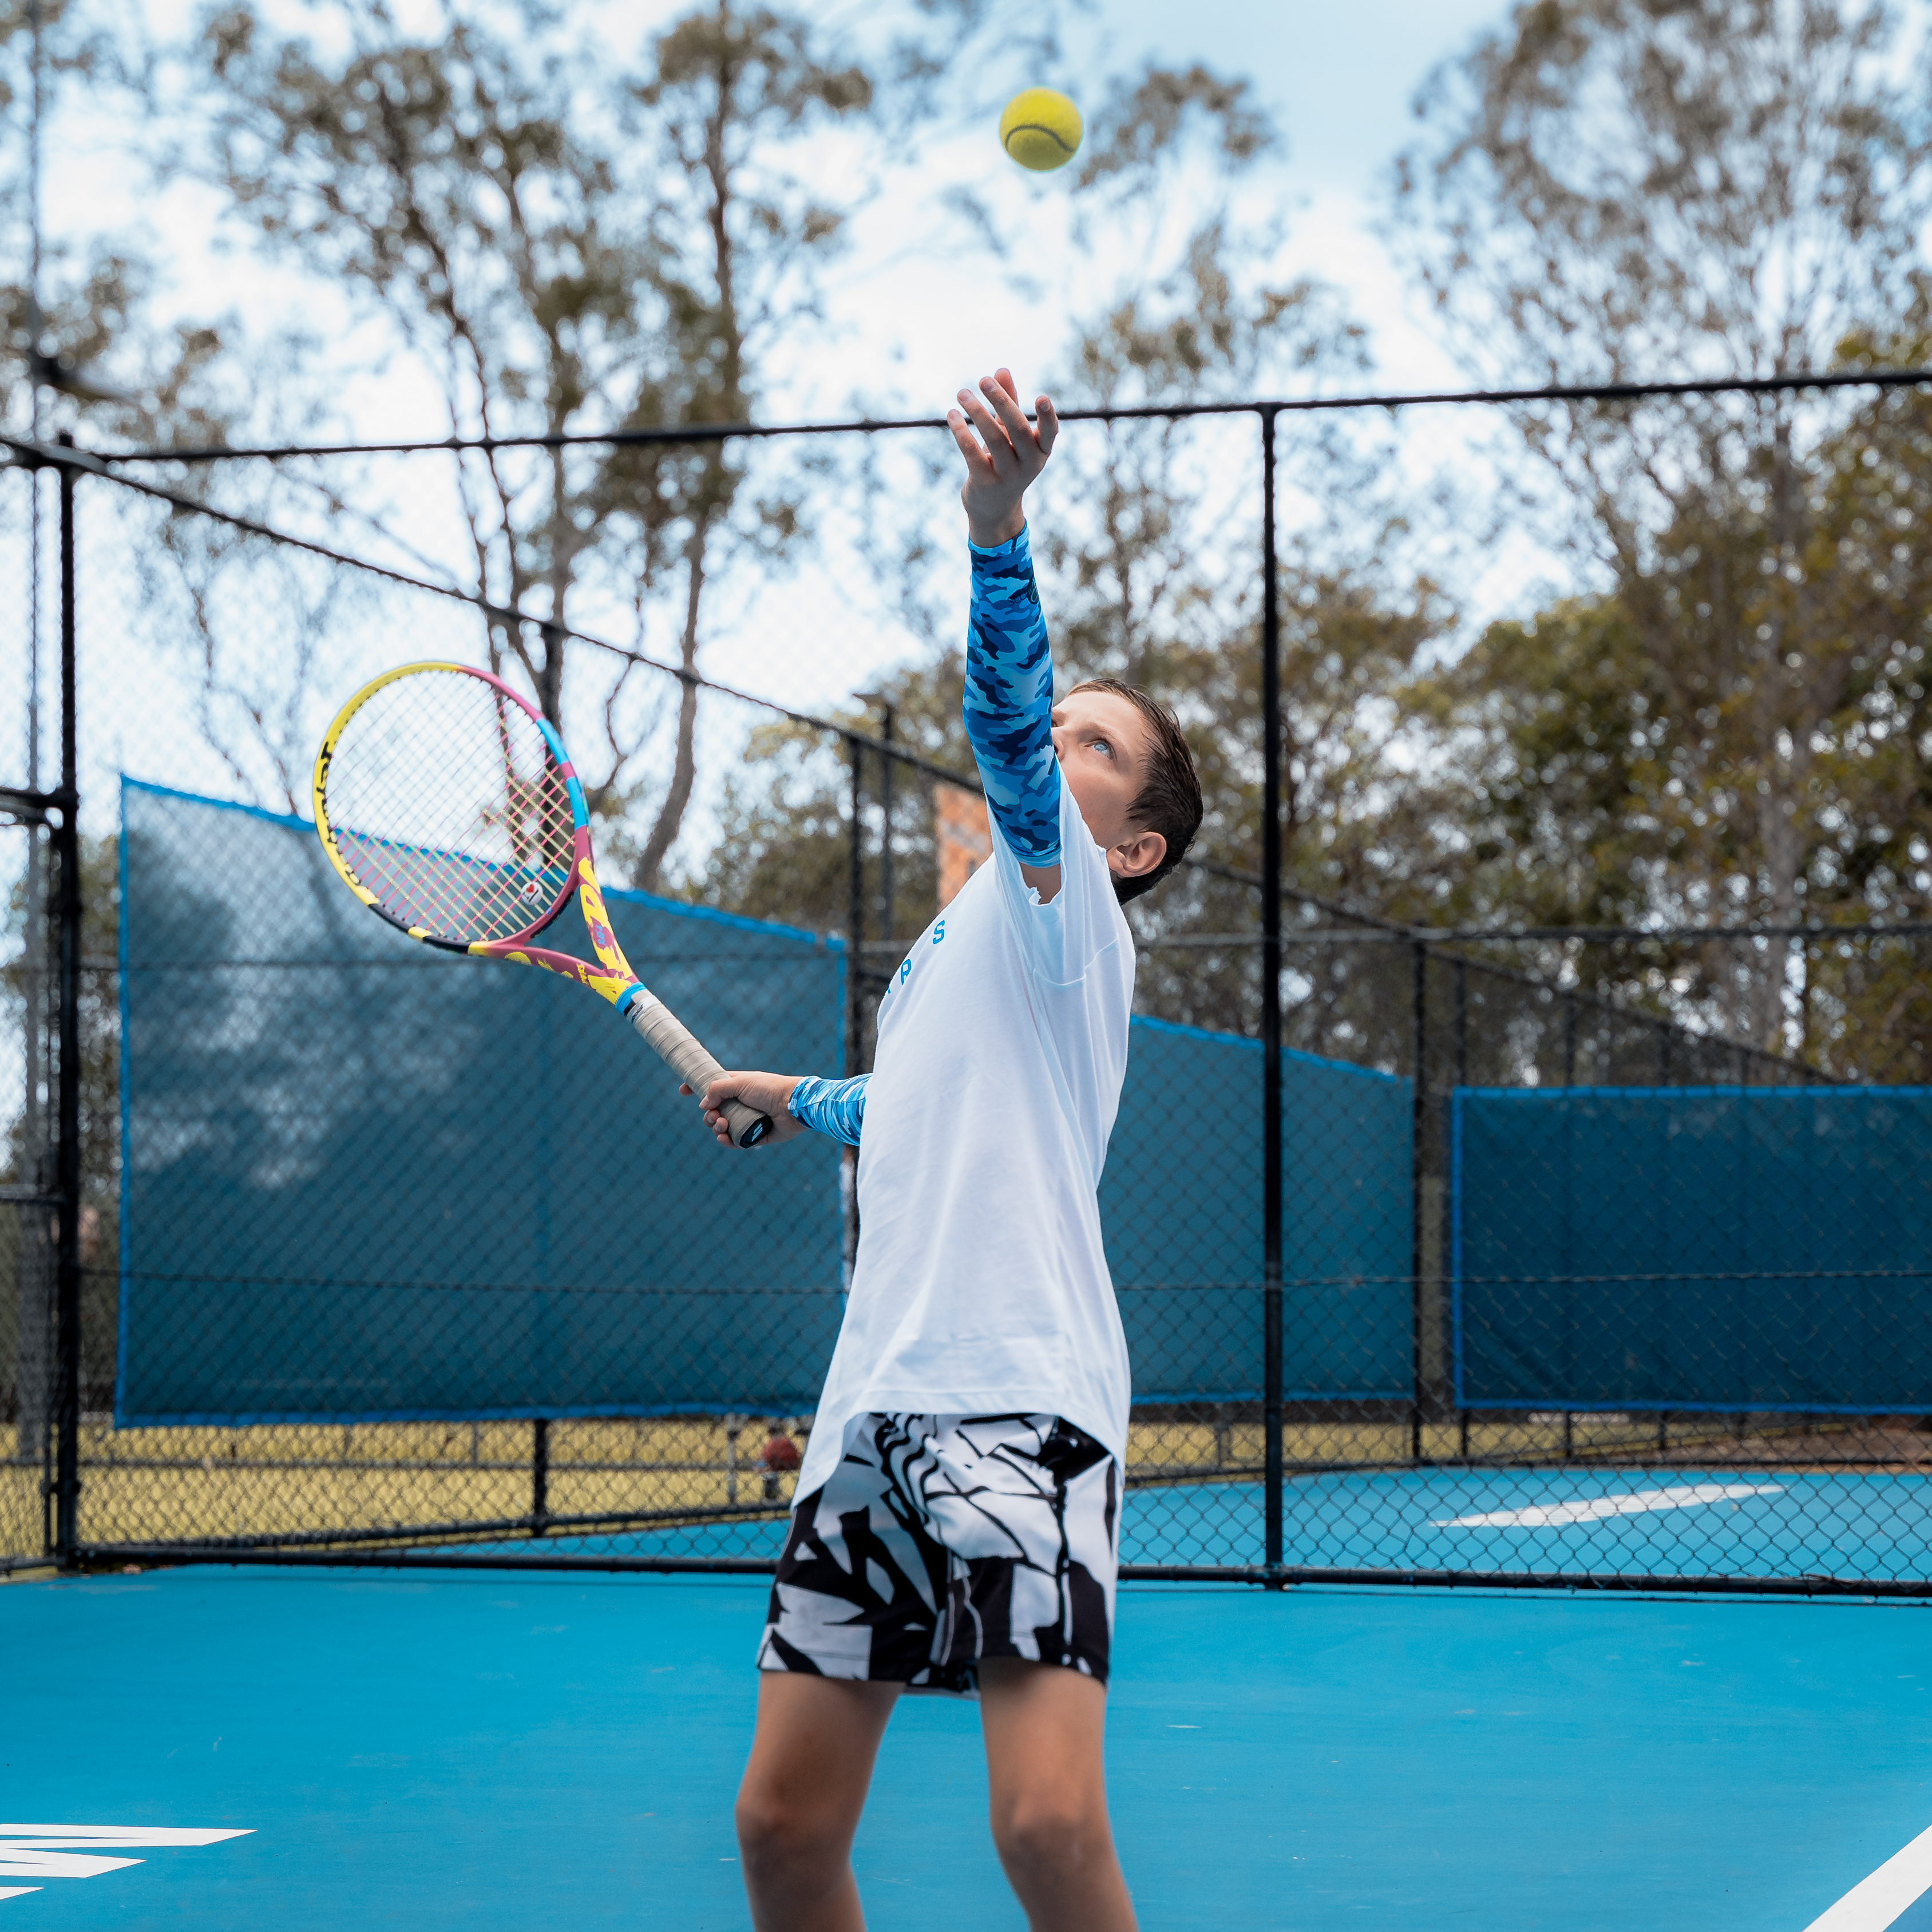 Image of a tennis player wearing SParms sun sleeves.